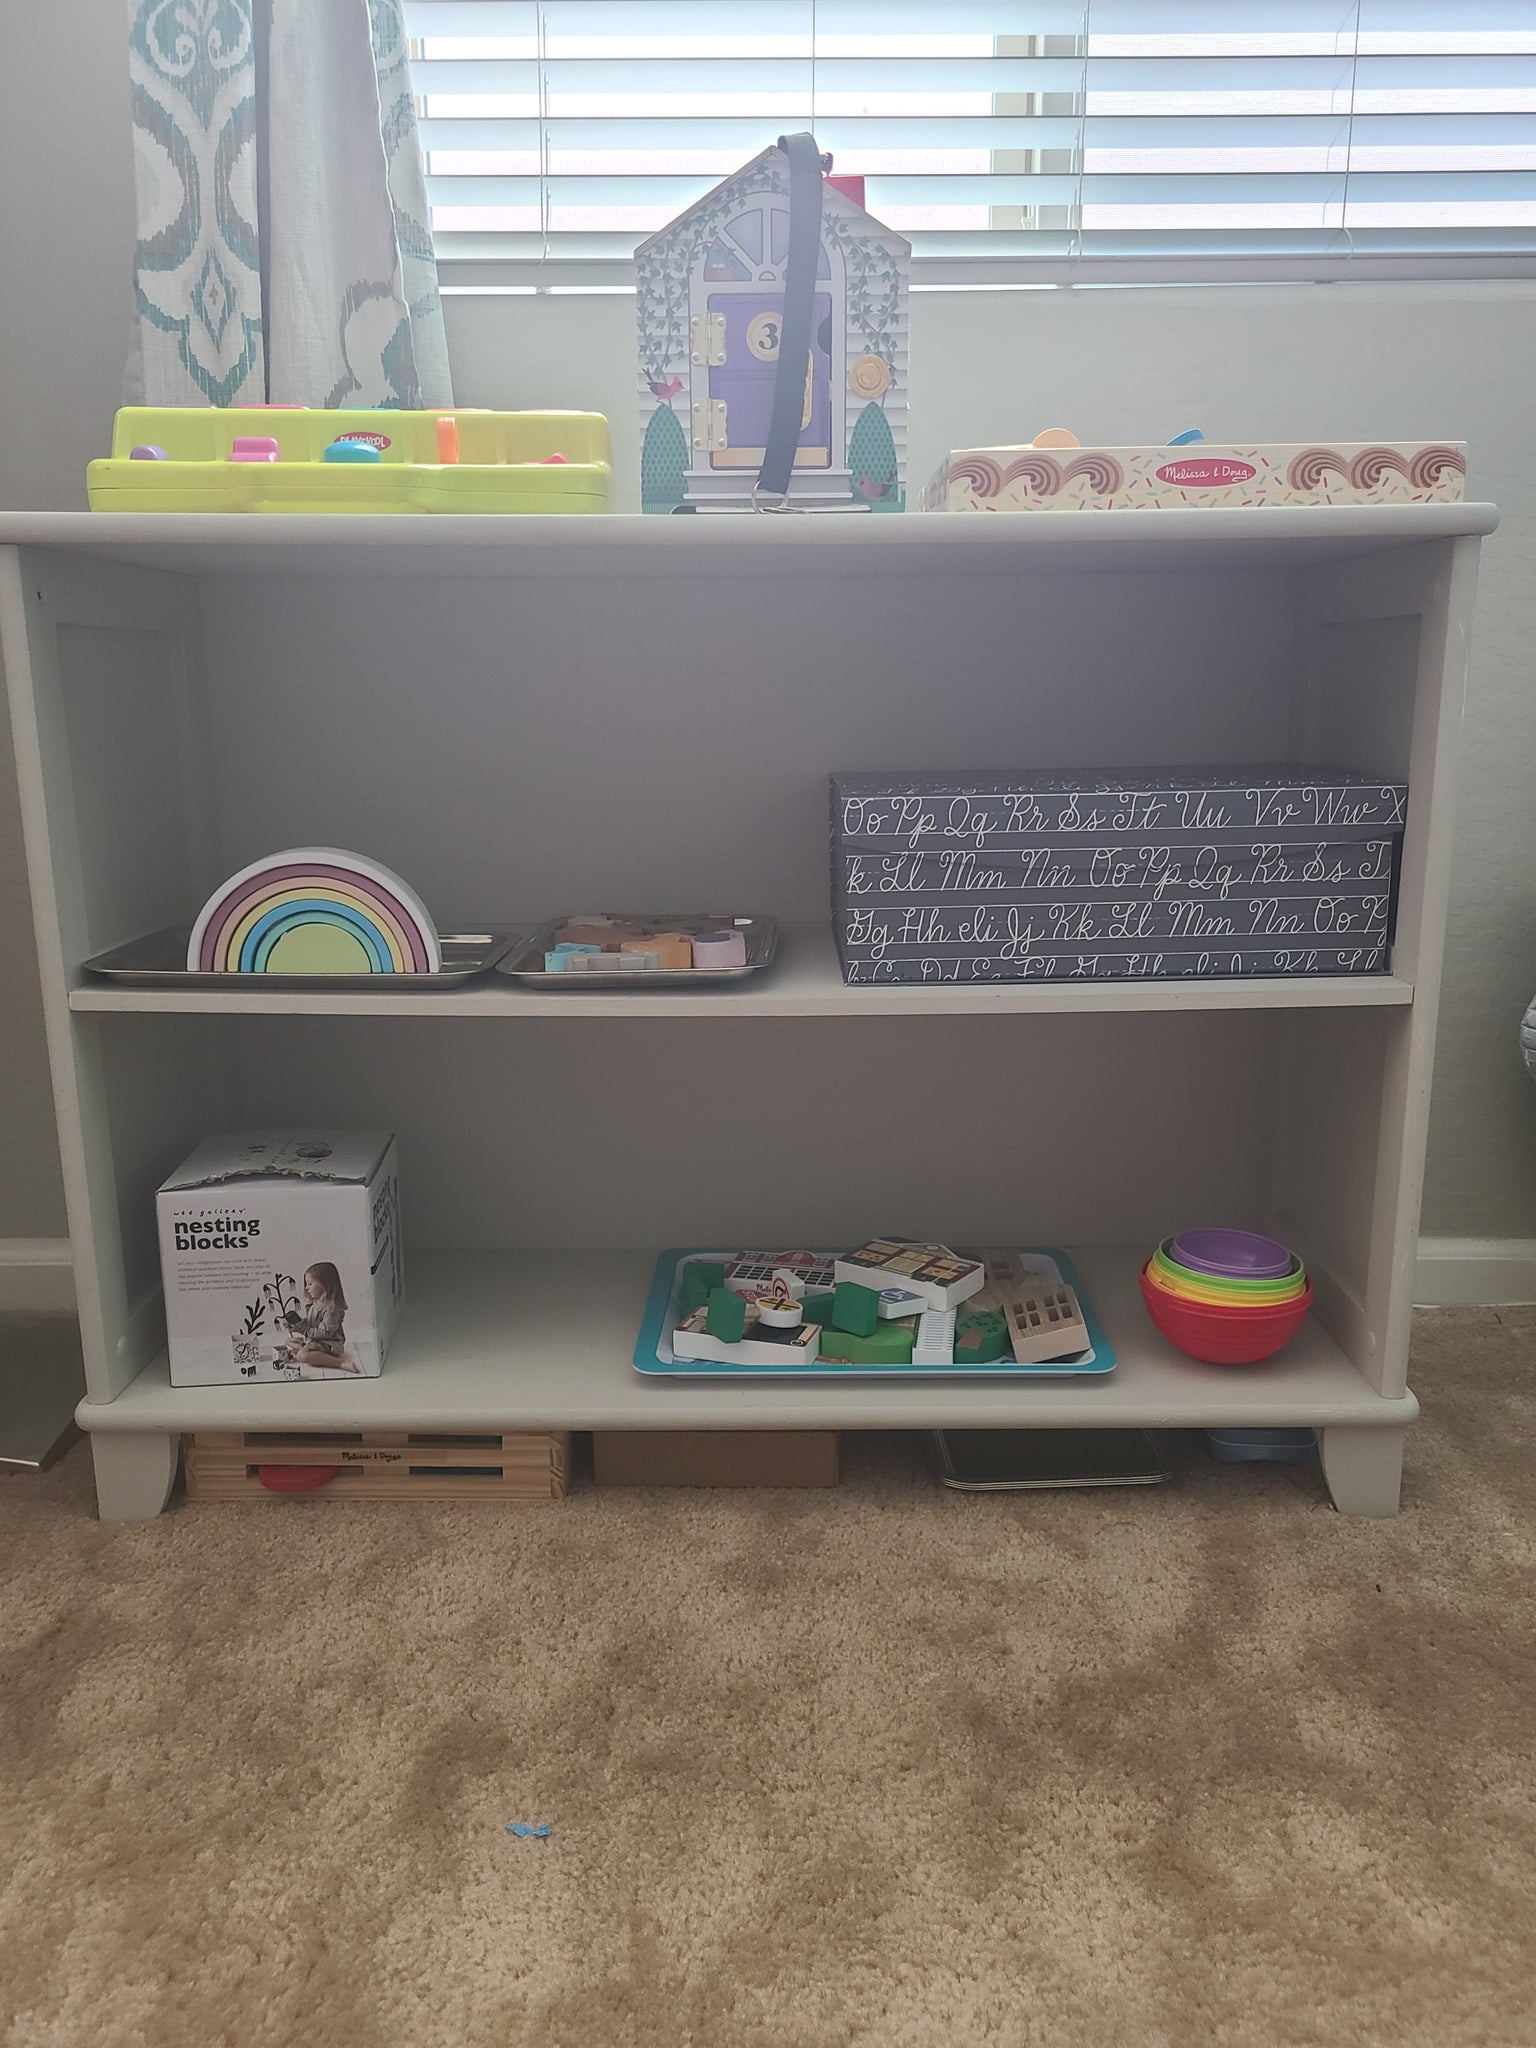 Tips for setting up your child's play space